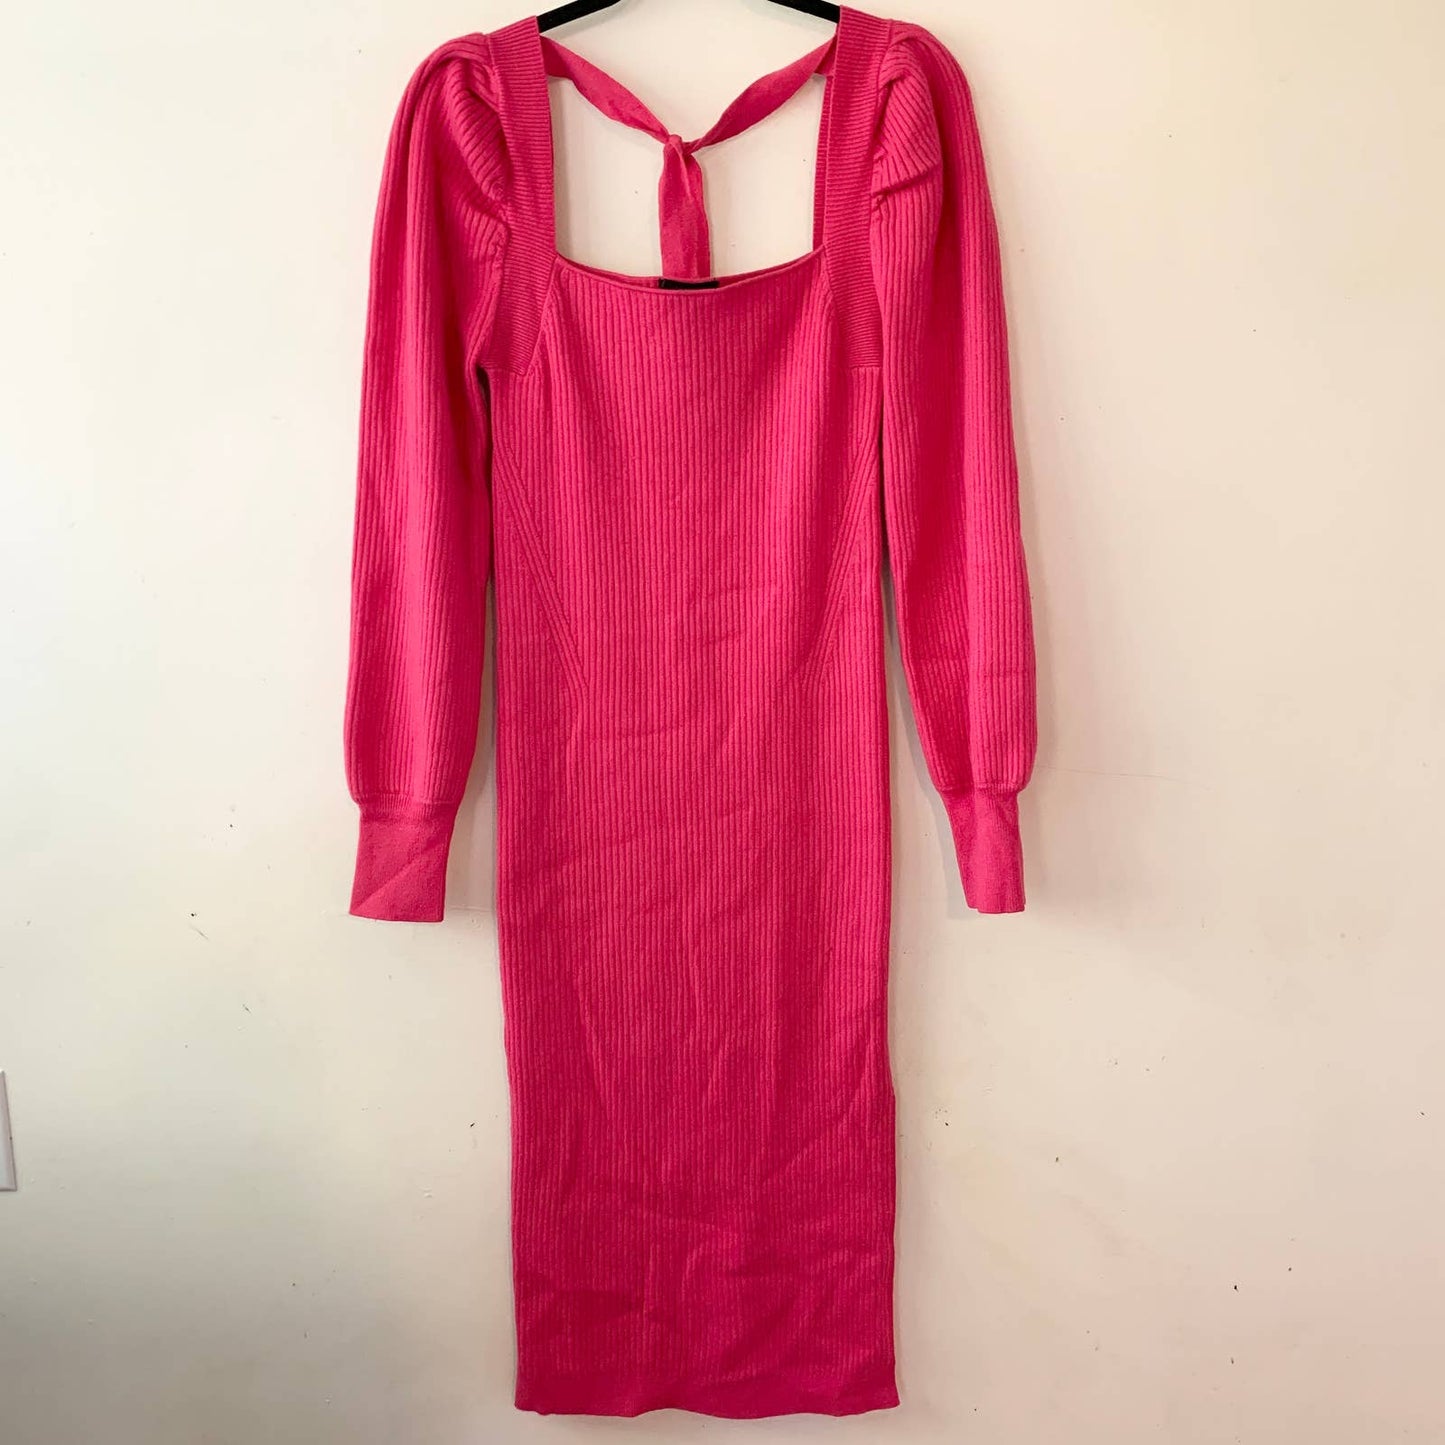 House of Harlow 1960 Hot Pink Ribbed Knit Sweater Dress